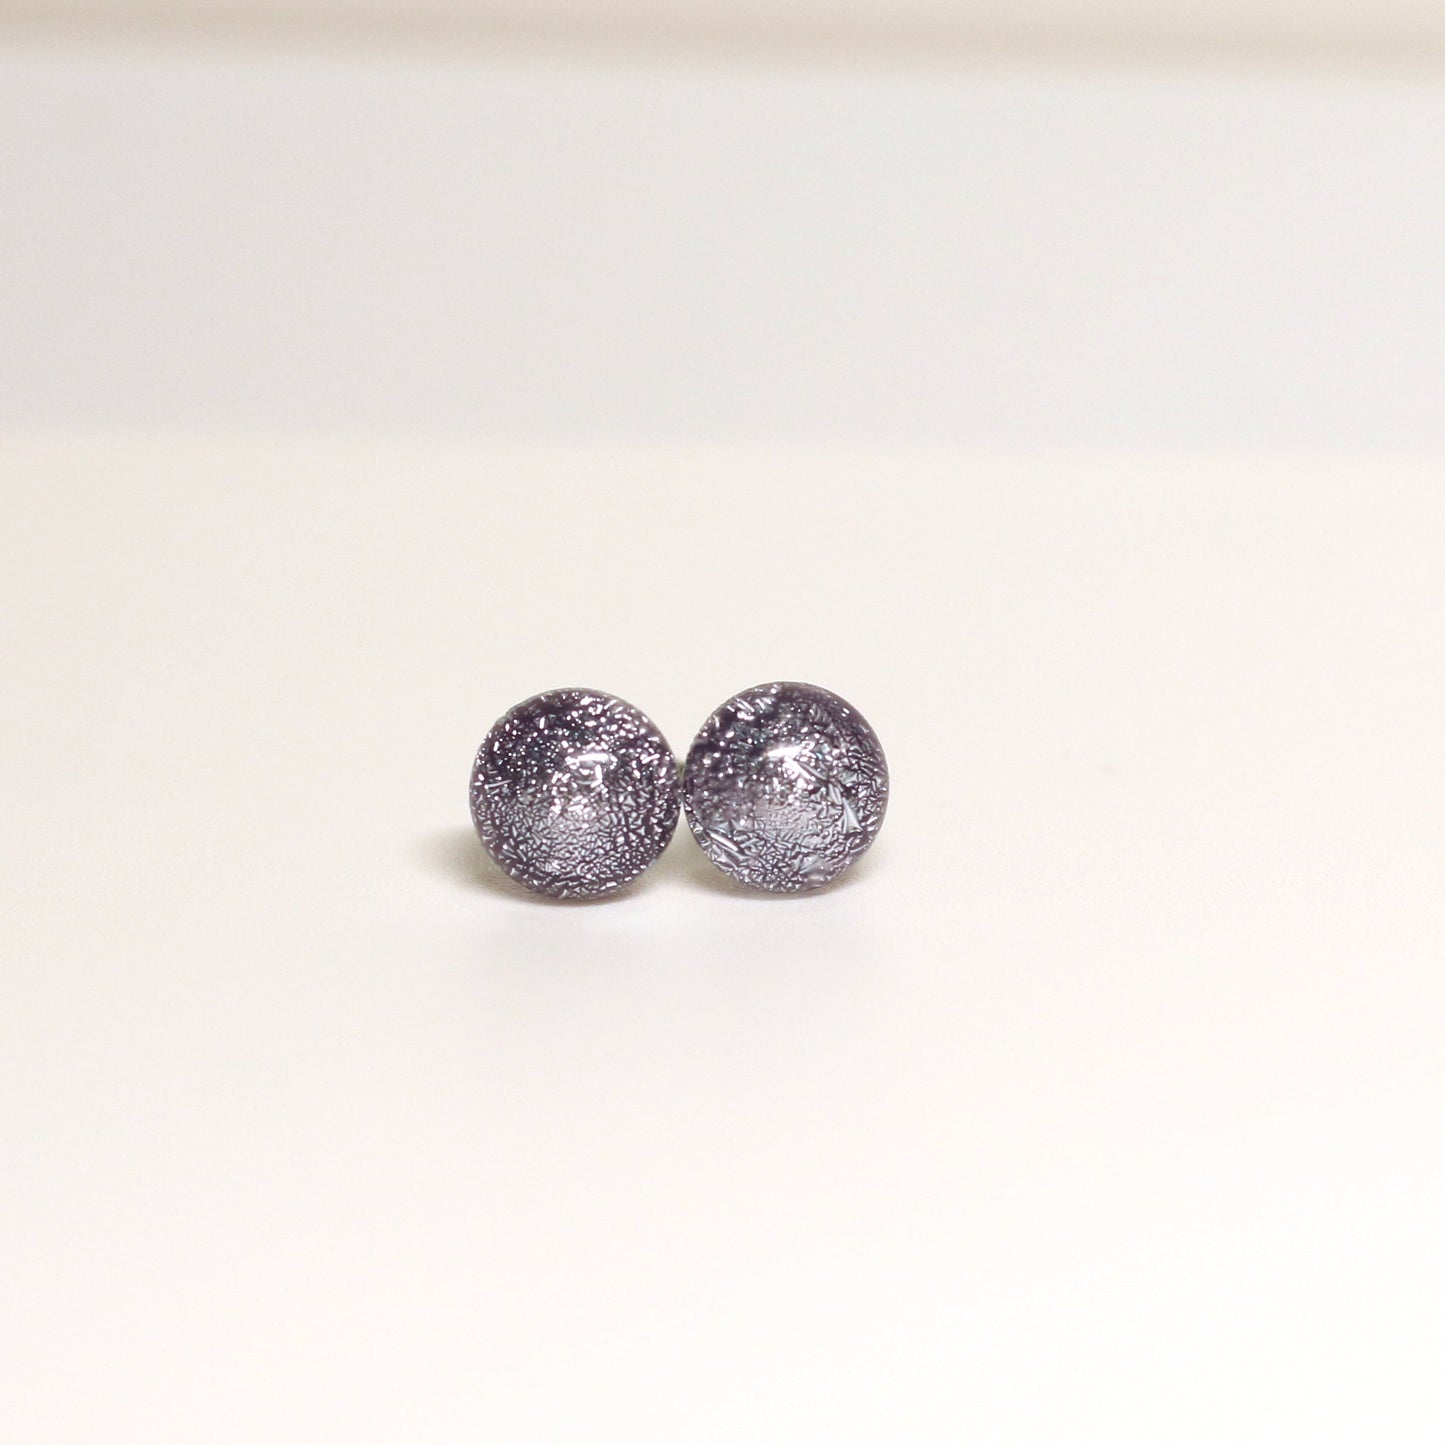 Tiny Dichroic Fused Glass Earring Studs - 3817